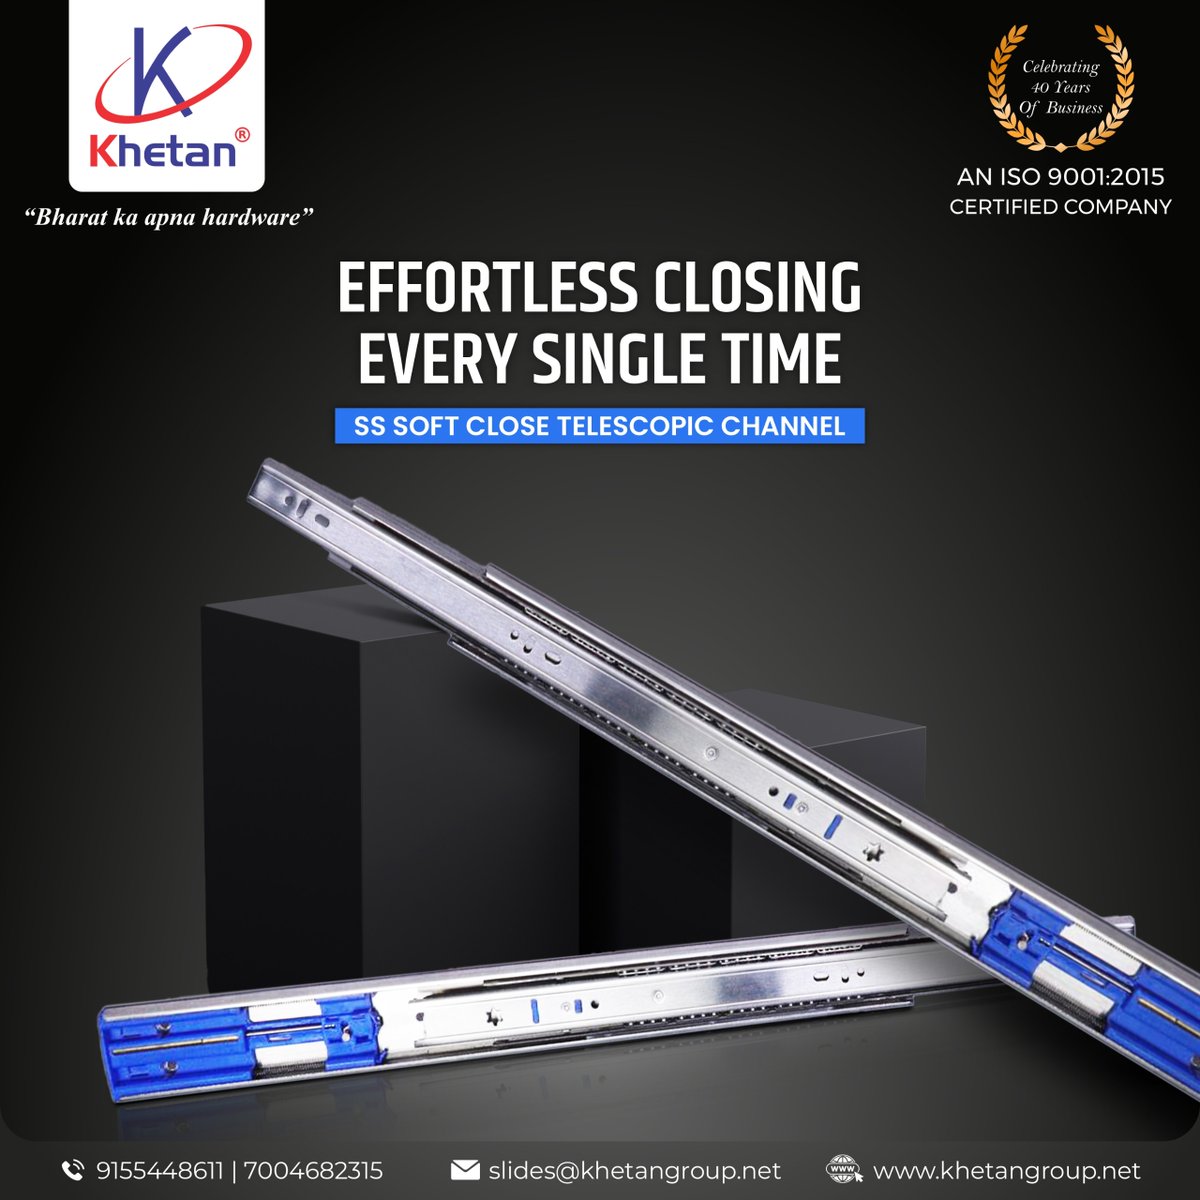 From open to close, a journey of effortless beauty..
.
.
For Dealership / Distributorship inquiries:-
☎️ +91 9155448611 / 9153975141
or visit our website:- khetangroup.net
.
.
.
.
#TelescopicChannel #StorageSolutions #OrganizationGoals #QualityCraftsmanship #GermanDesign